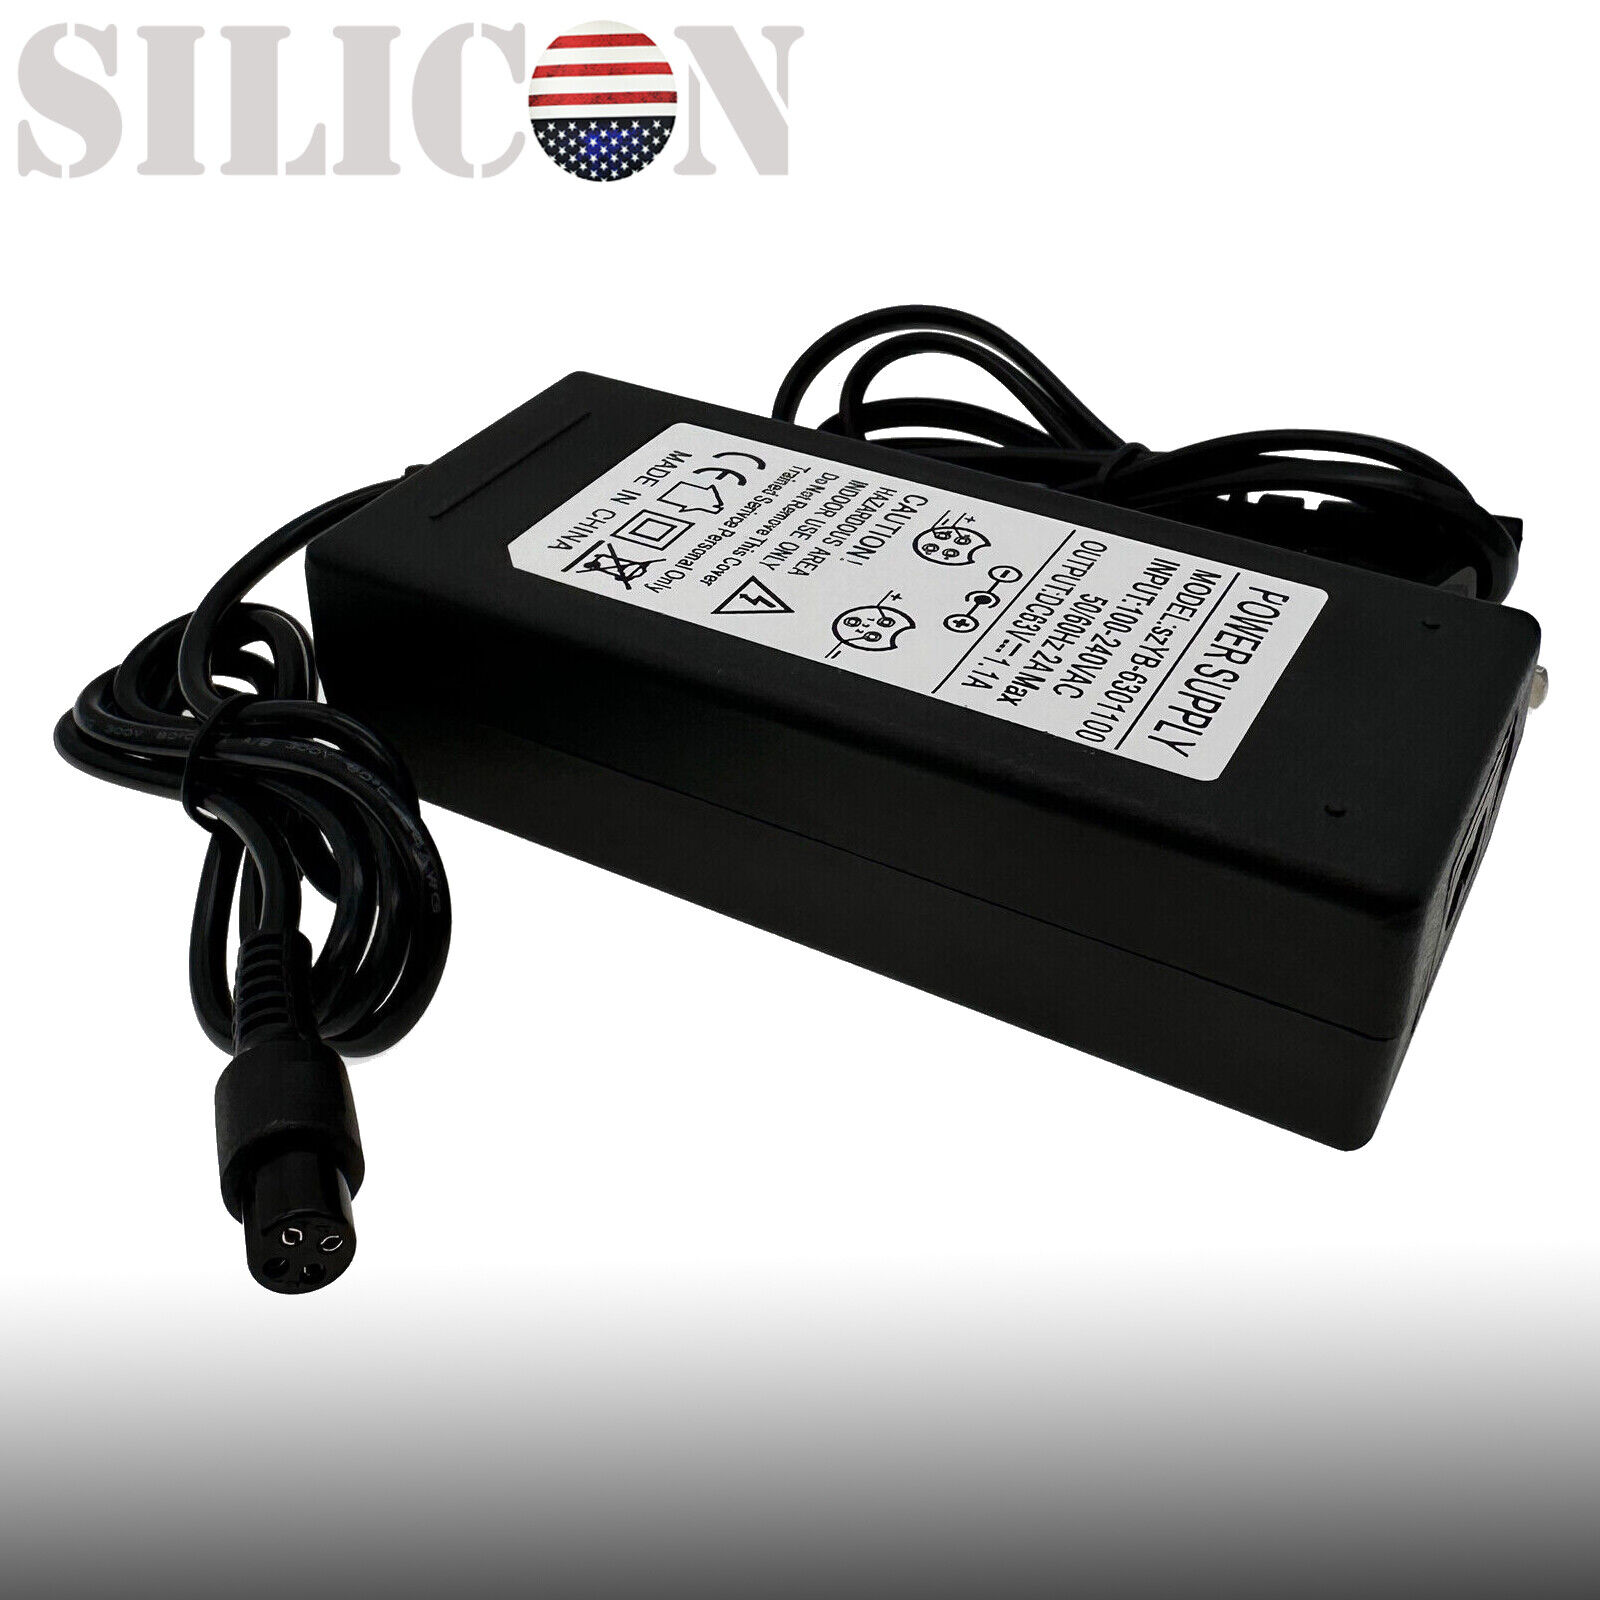 63V 1.1A Battery Charger Assembly For Ninebot Segway MiNi Pro MiniLITE Scooter 63V 1.1A Battery Charger Assembly For Ni - Click Image to Close